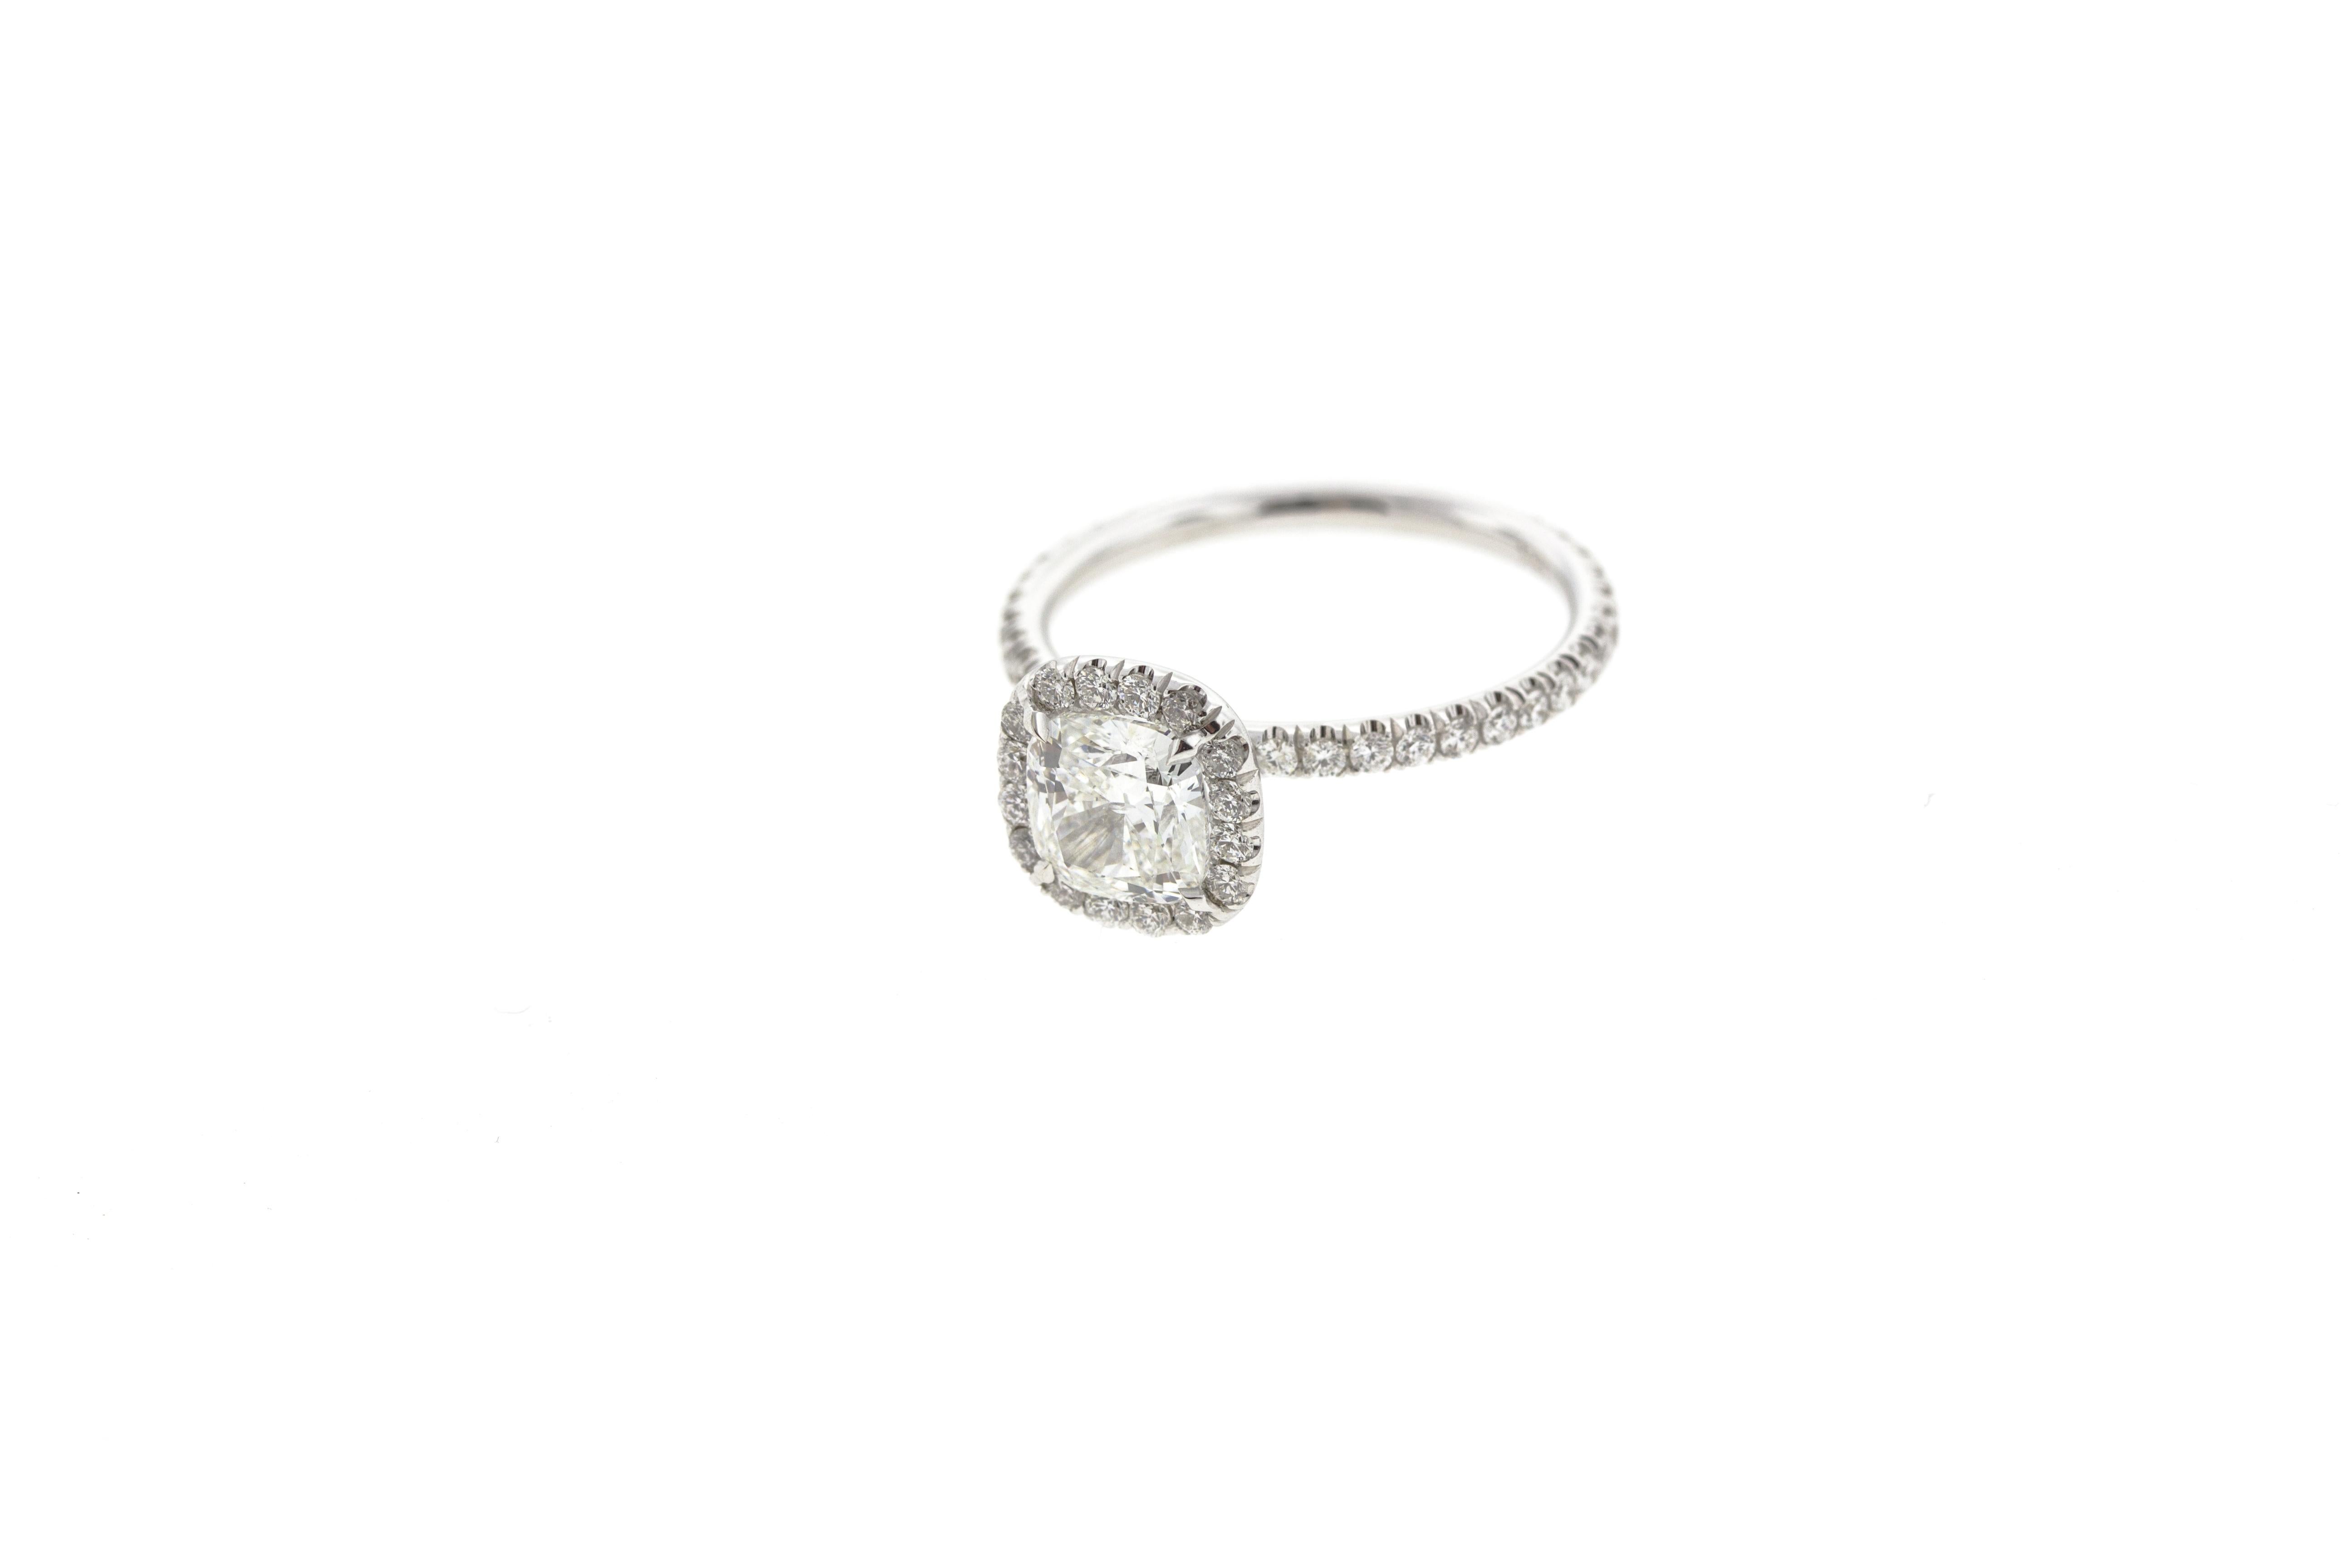 This stunning round diamond engagement ring has a built-in (raised) setting and features a gorgeous diamond cushion-shaped halo and diamonds on the shank. It's one of our most popular style of ring and for a good reason: this classic engagement ring